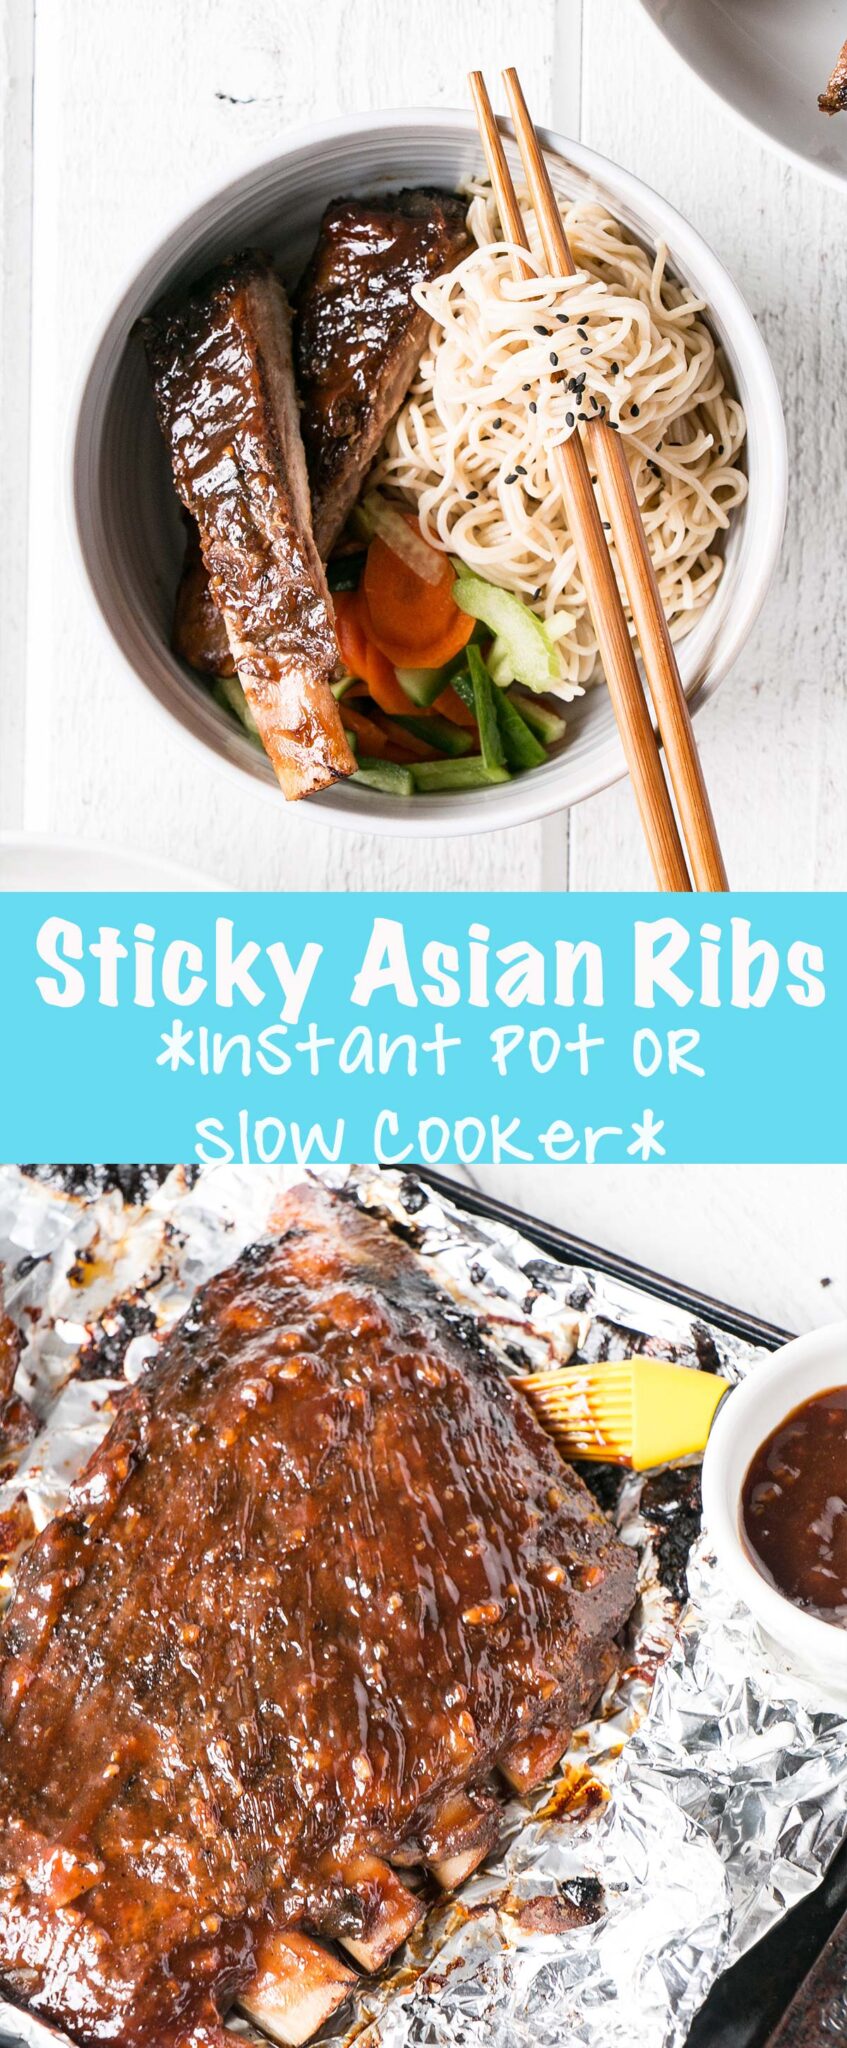 Sticky Asian Ribs made in the Slow Cooker or Instant Pot for 2 truly easy ways to having ribs for dinner! #ribs #slowcookerribs #instantpot #instantpotribs #slowcooker